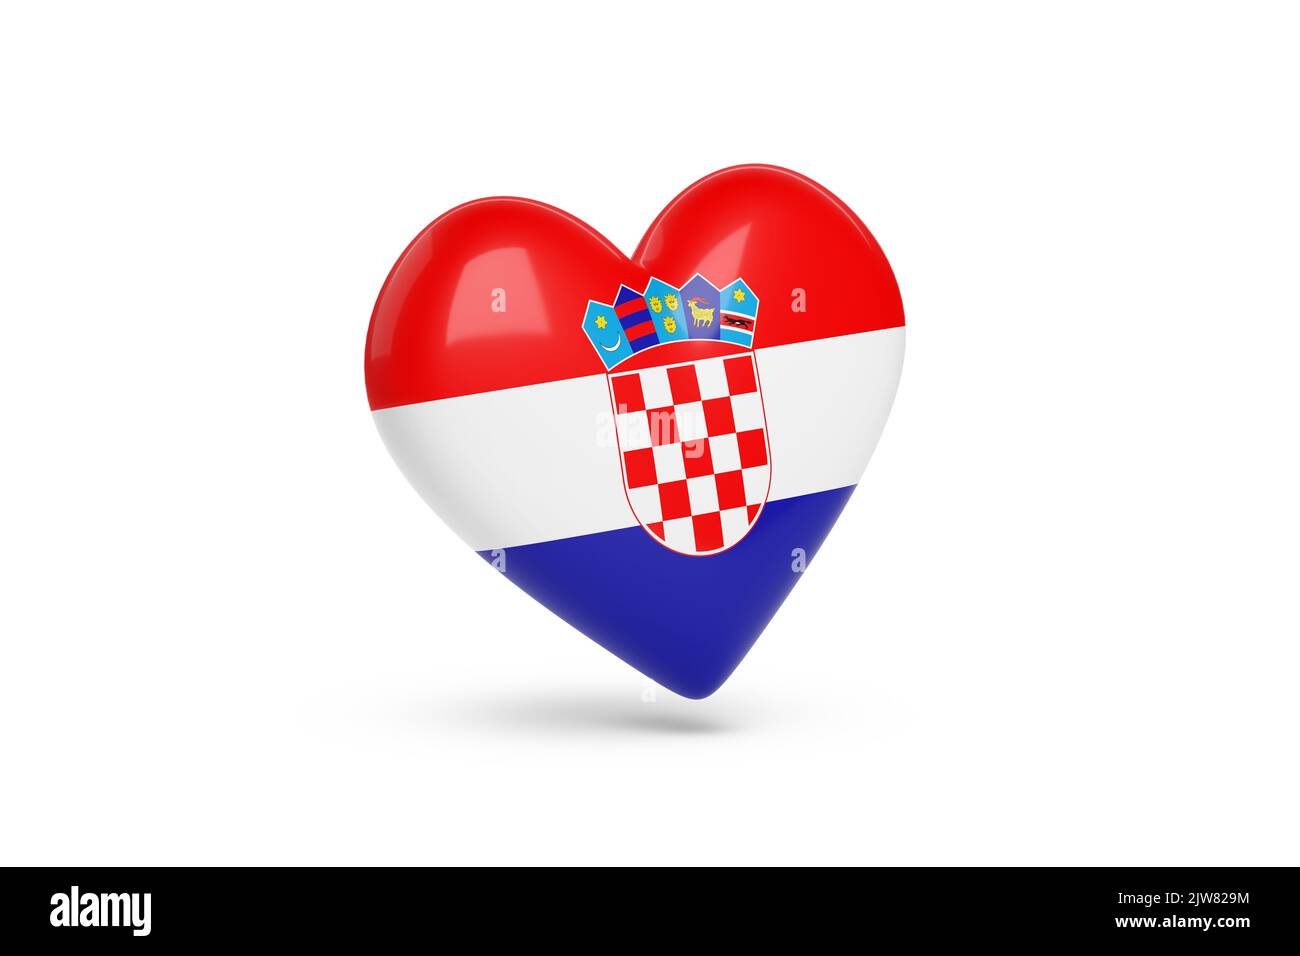 Heart with the colors of flag of Croatia isolated on white background. 3d illustration. Stock Photo